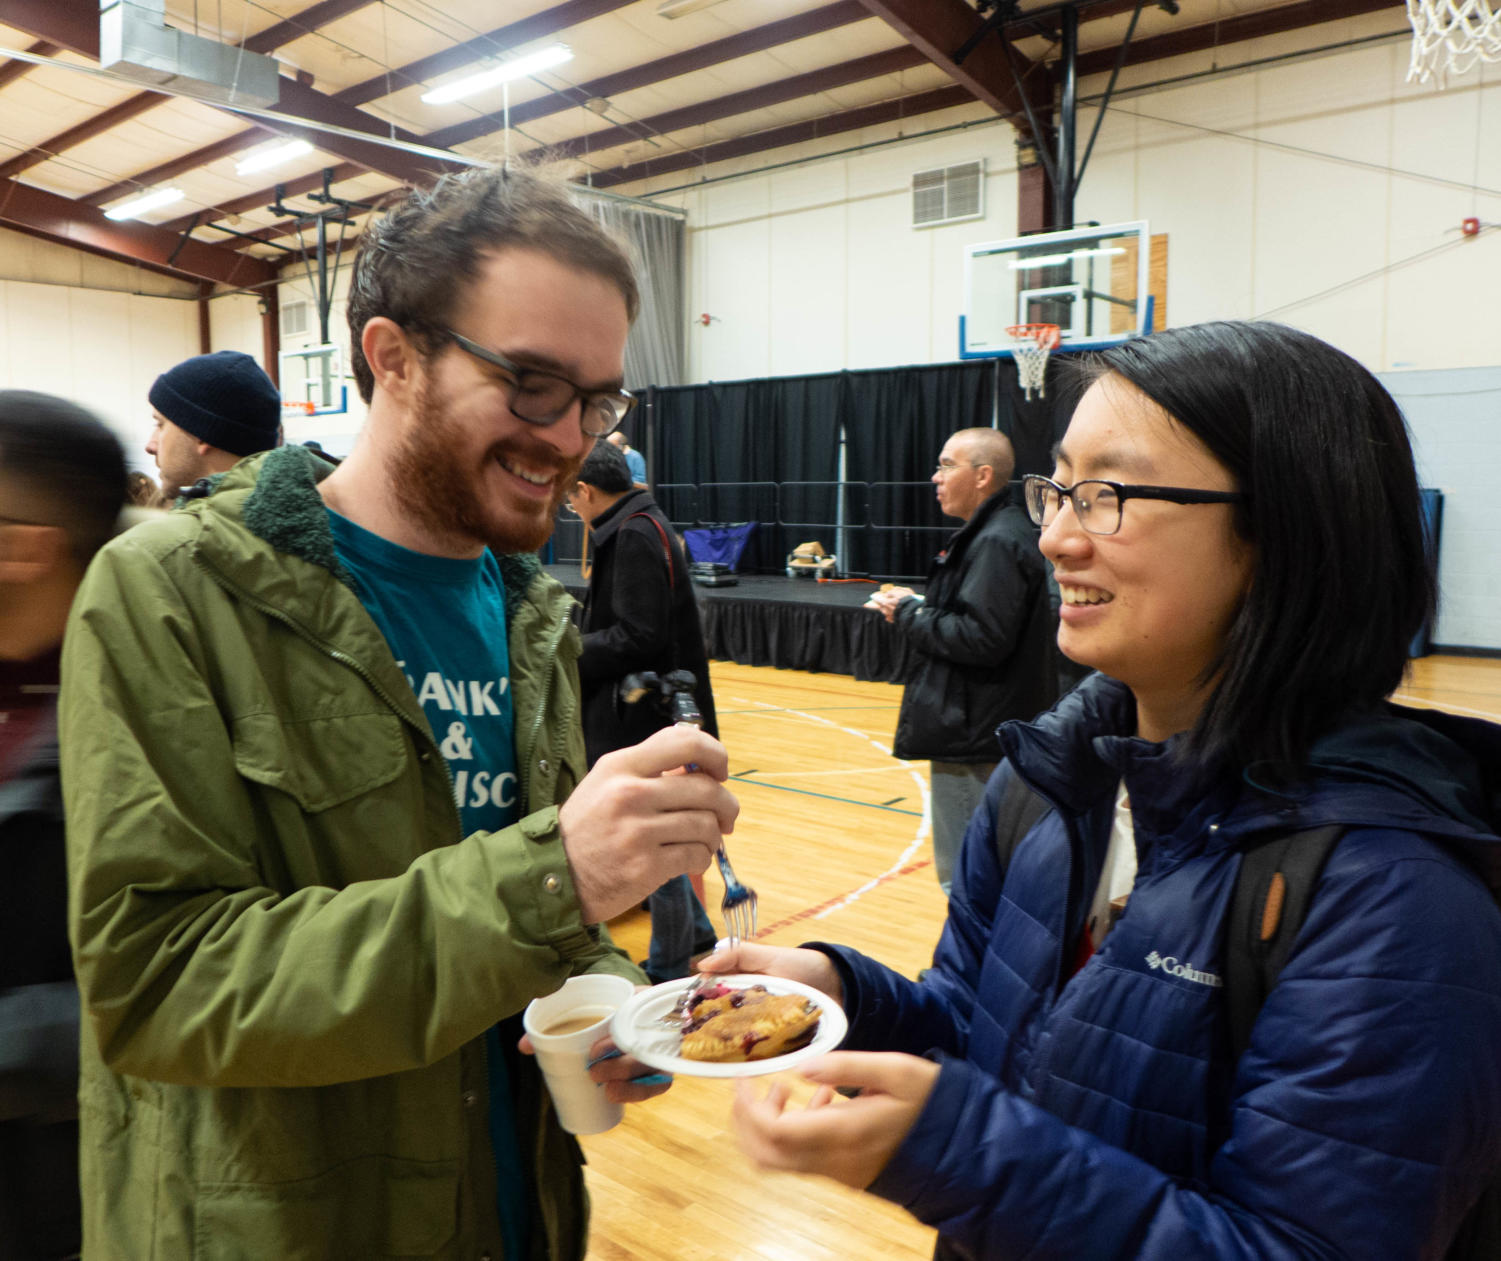 Mickey Cronin, left, and Julie Wu share a slice of pie. The two attended the event to celebrate Cronin’s upcoming birthday.